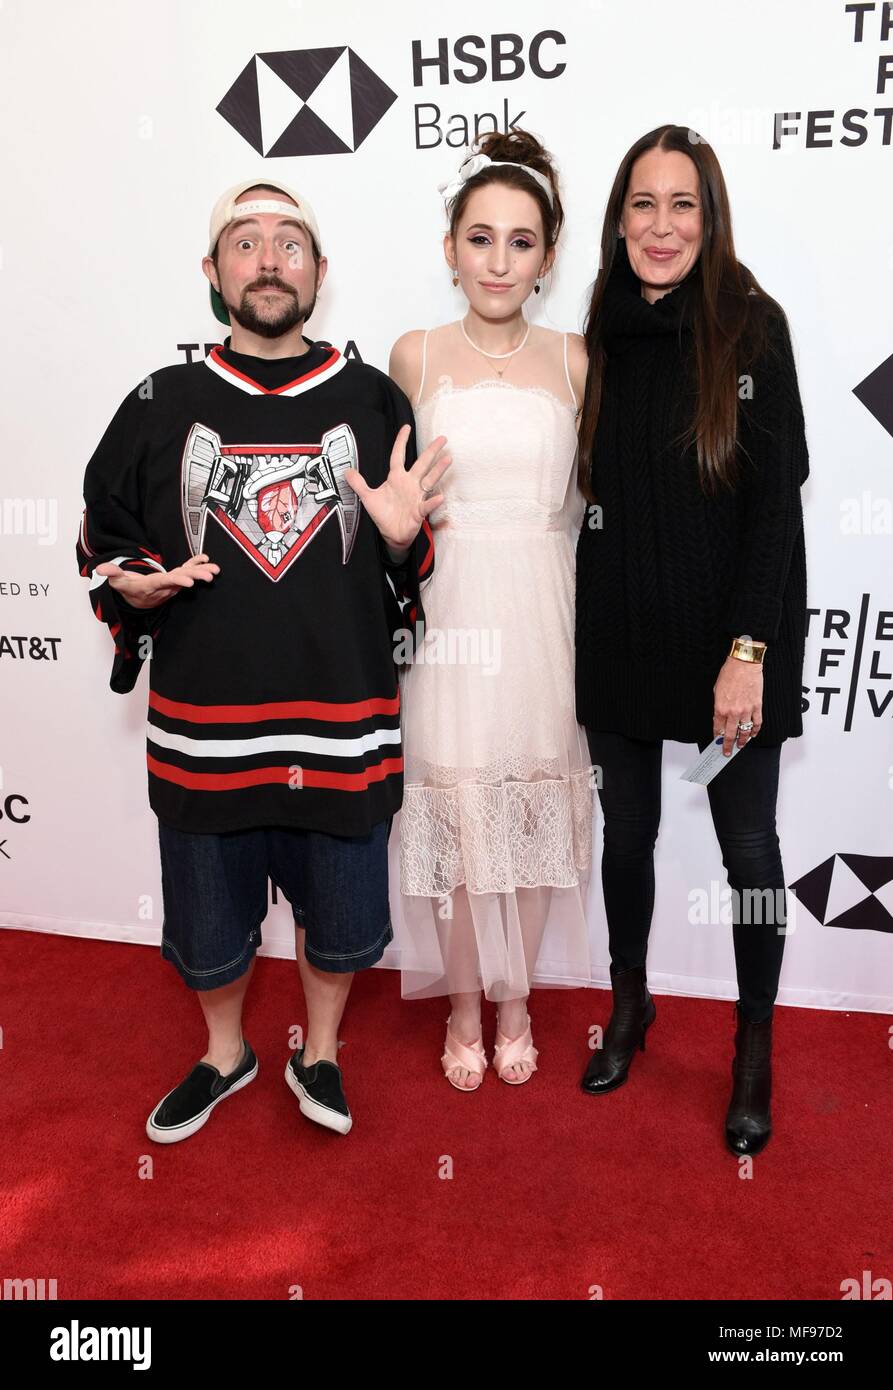 New York, NY, USA. 24th Apr, 2018. Kevin Smith, Harley Quinn Smith, Jennifer Schwalbach Smith at arrivals for ALL THESE SMALL MOMENTS Premiere at the Tribeca Film Festival 2018, School of Visual Arts (SVA) Theatre, New York, NY April 24, 2018. Credit: Derek Storm/Everett Collection/Alamy Live News Stock Photo